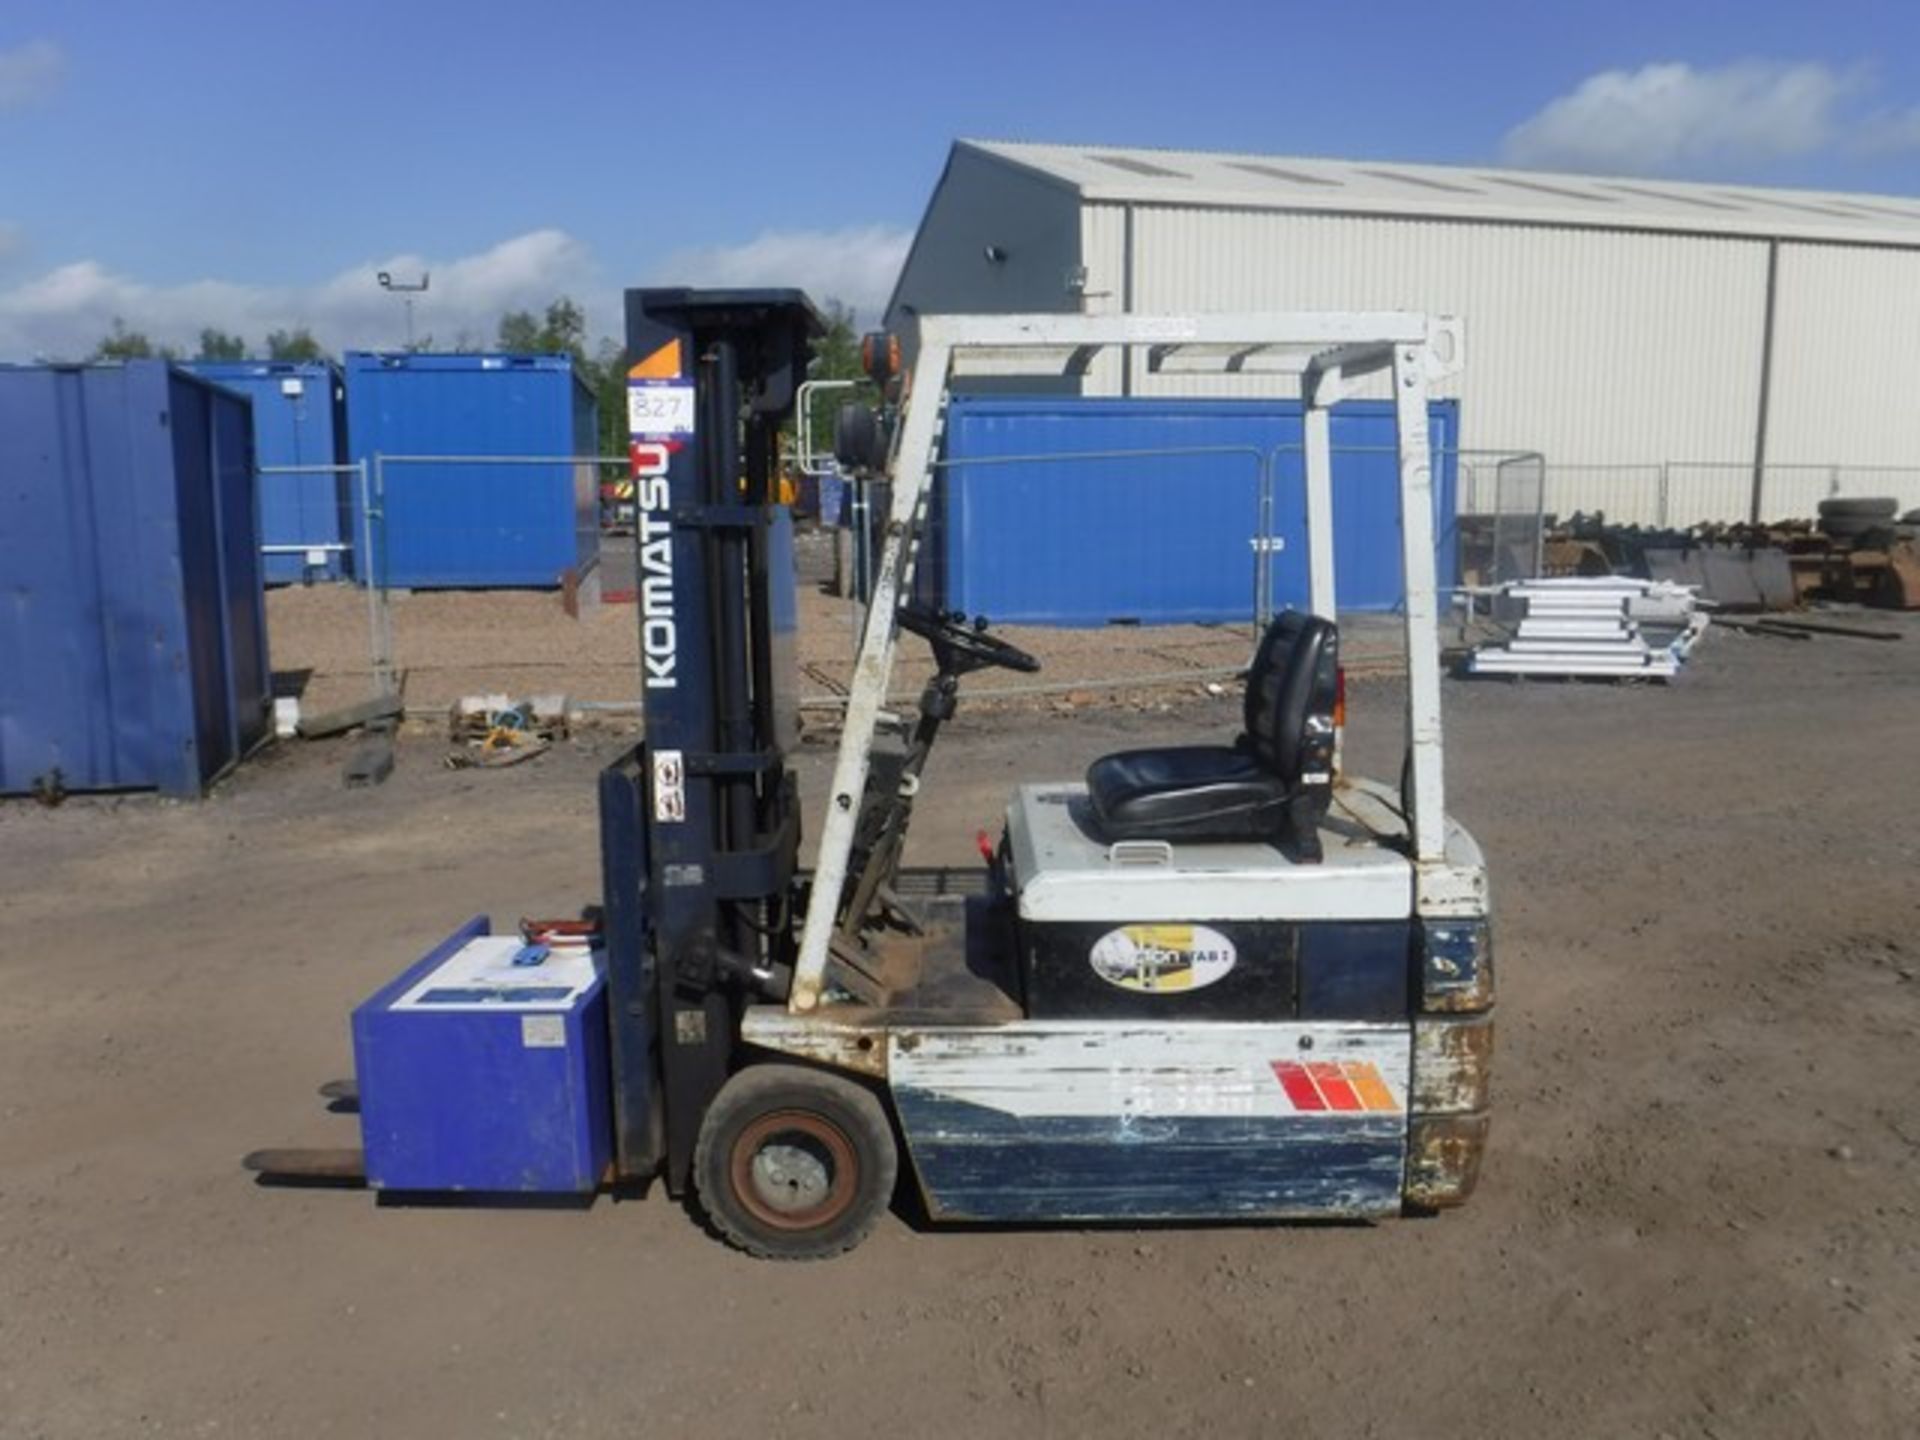 KOMATSU F 18M electric forklift 5082 hrs (not verified) c/w charger Asset - 727-3301 - Image 5 of 7